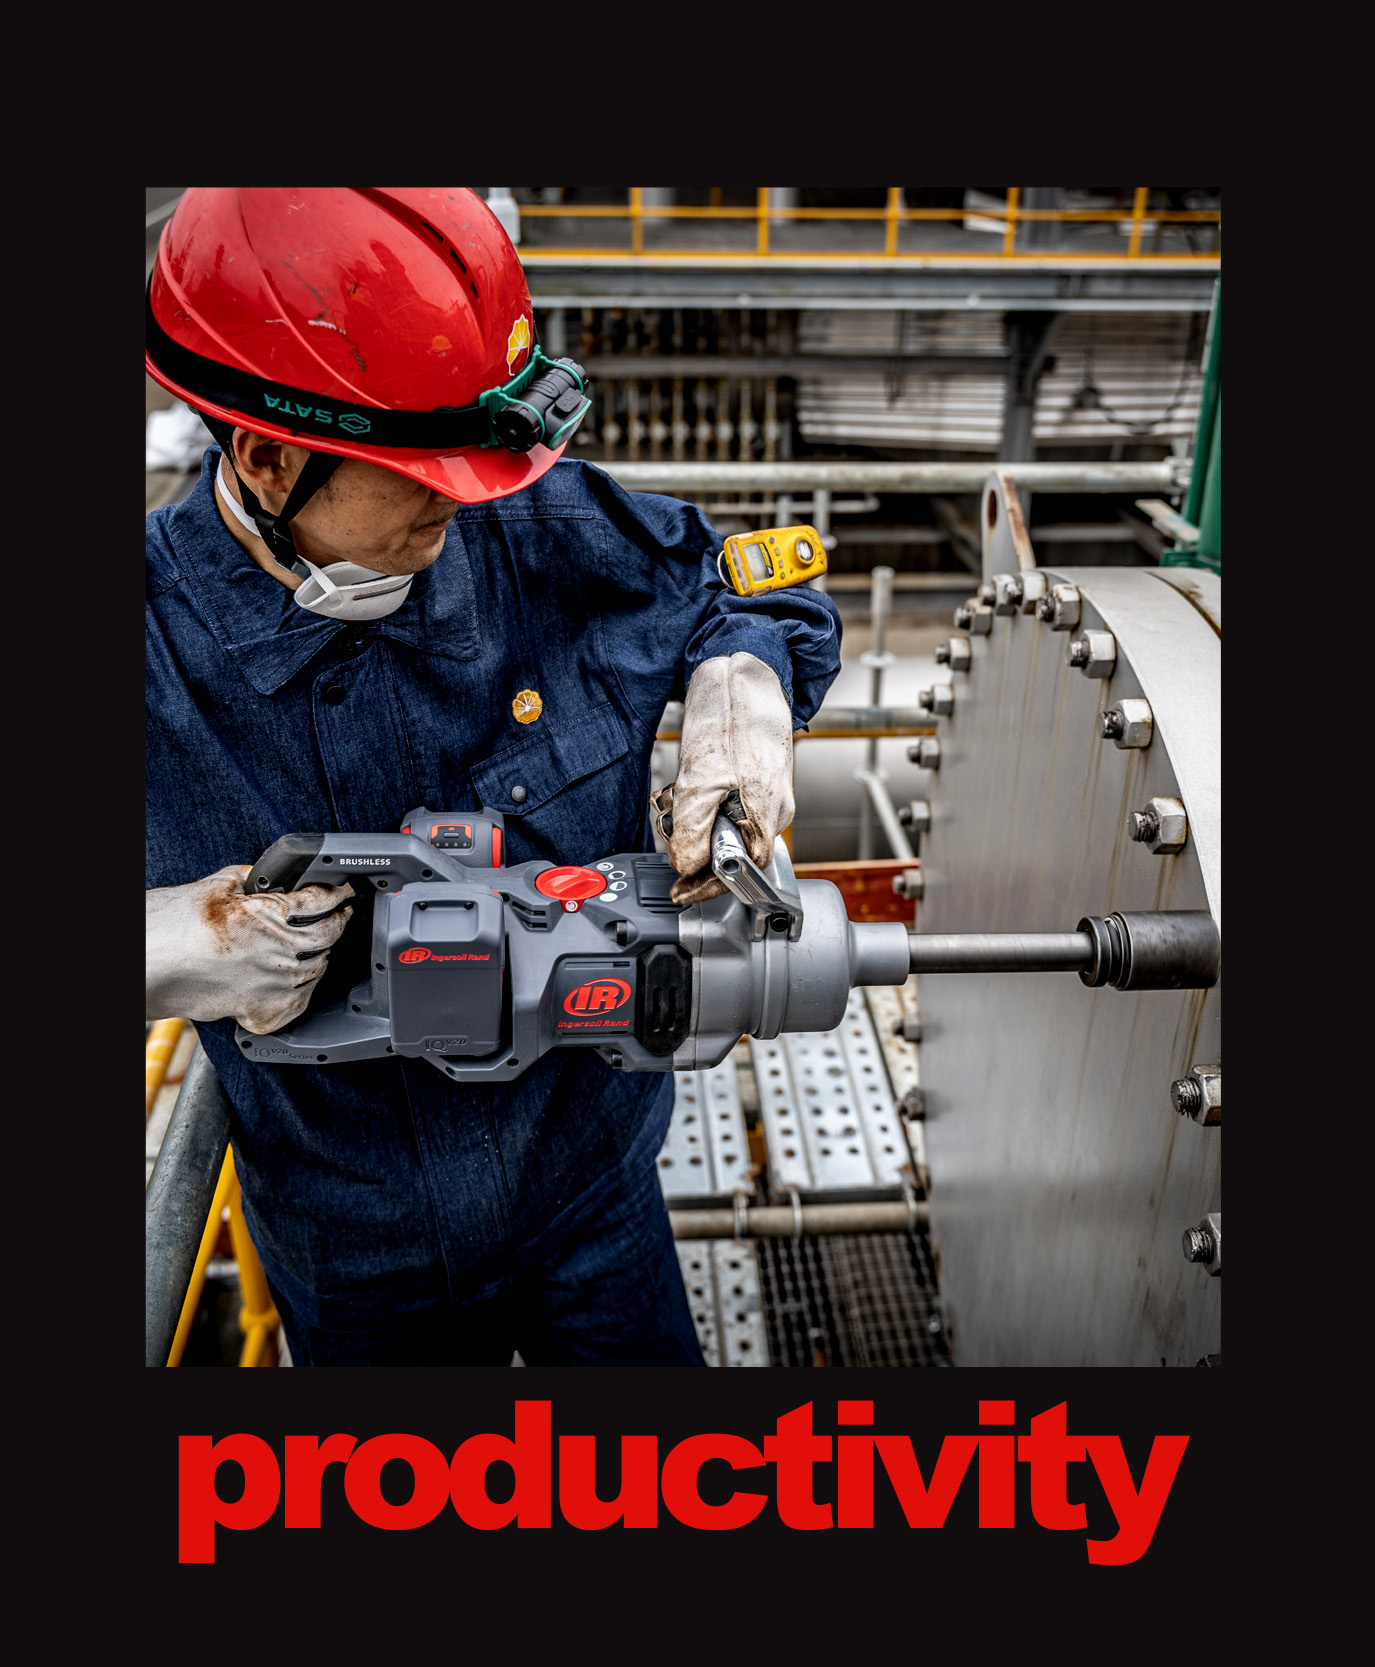 Ingersoll Rand Cordless Impact Wrench - Productivity